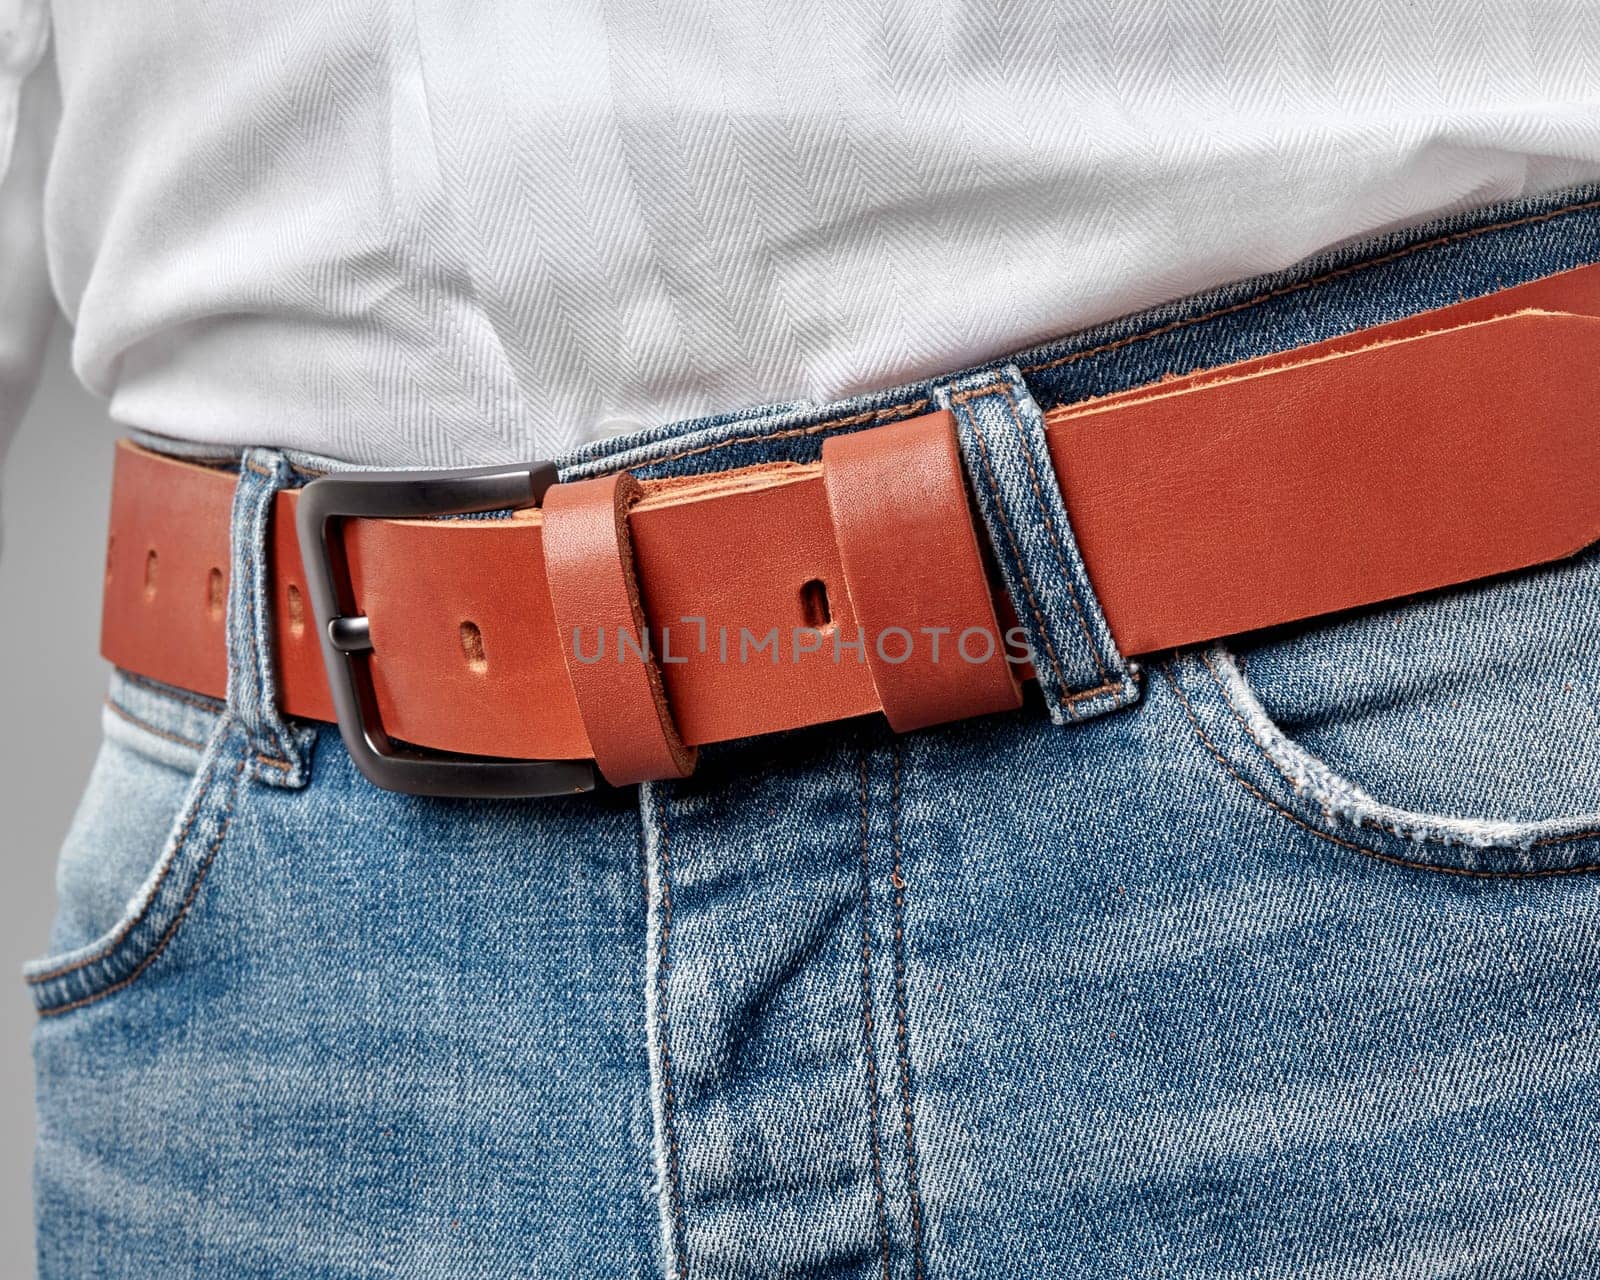 Closeup of terracotta leather belt with custom DAD embossing on loop complementing casual look of man dressed in jeans and white shirt. Concept of quality craftsmanship and personalized gifting